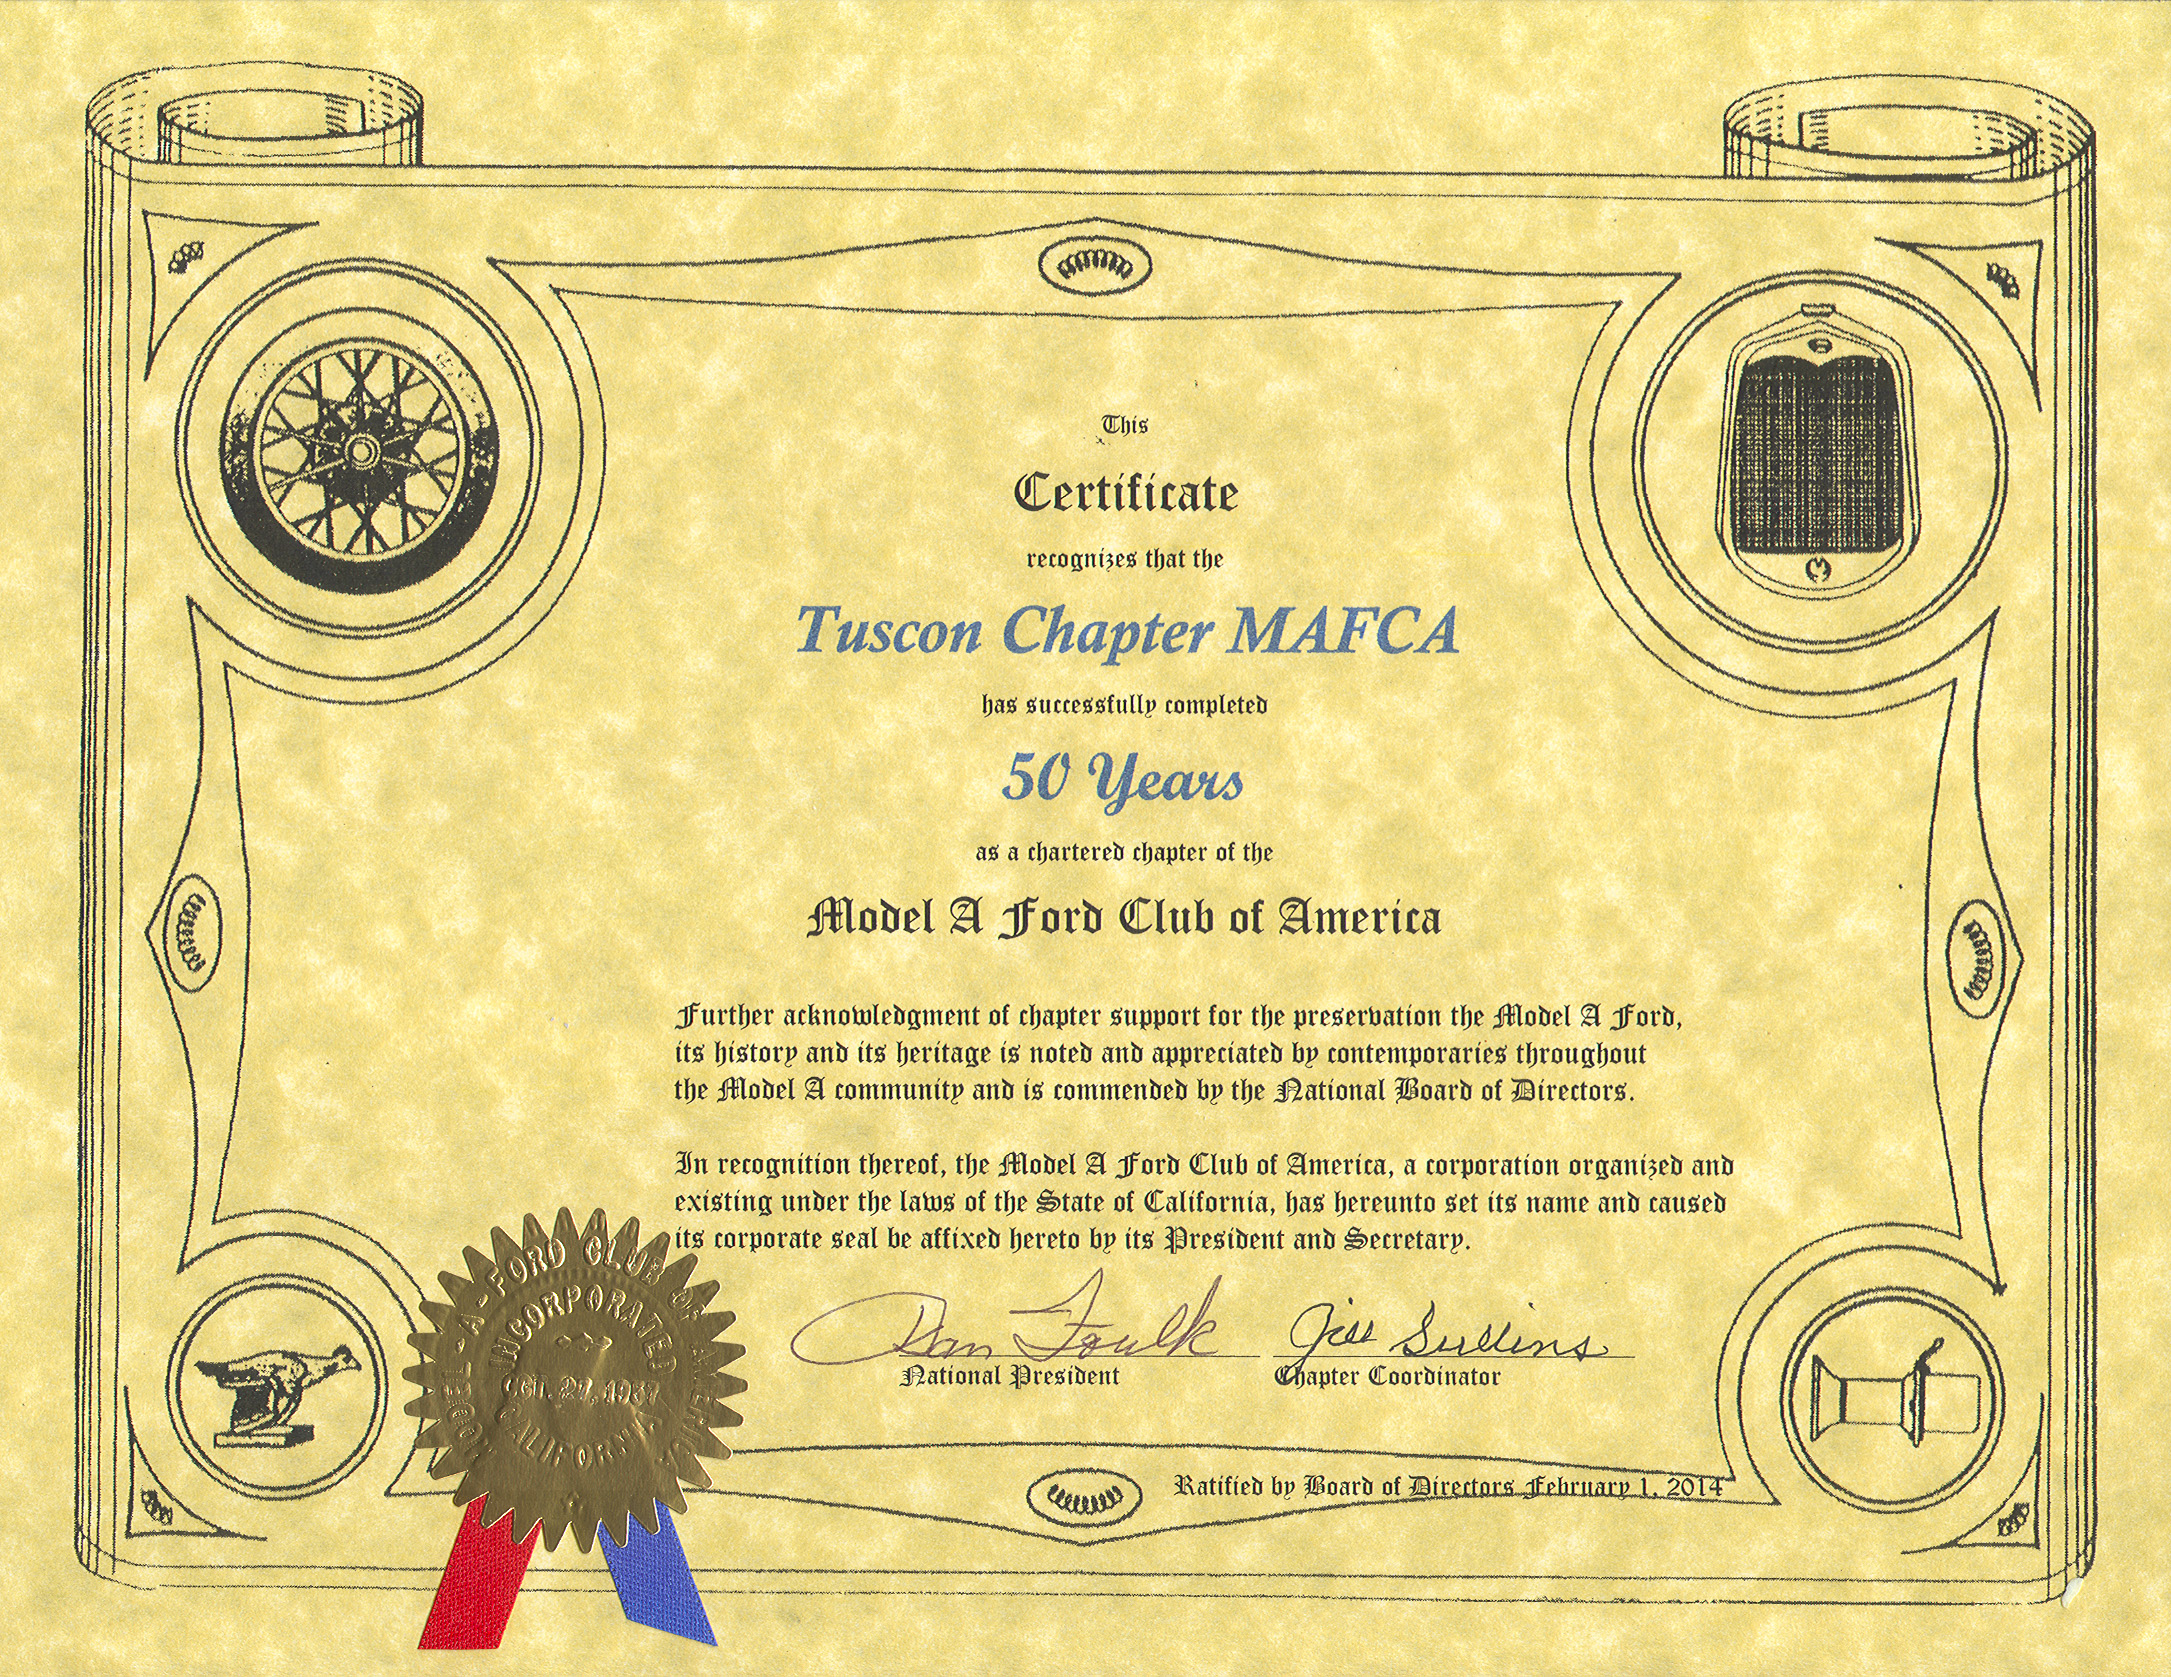 Tucson Chapter Model A Ford Club of America - 50 Year Charter